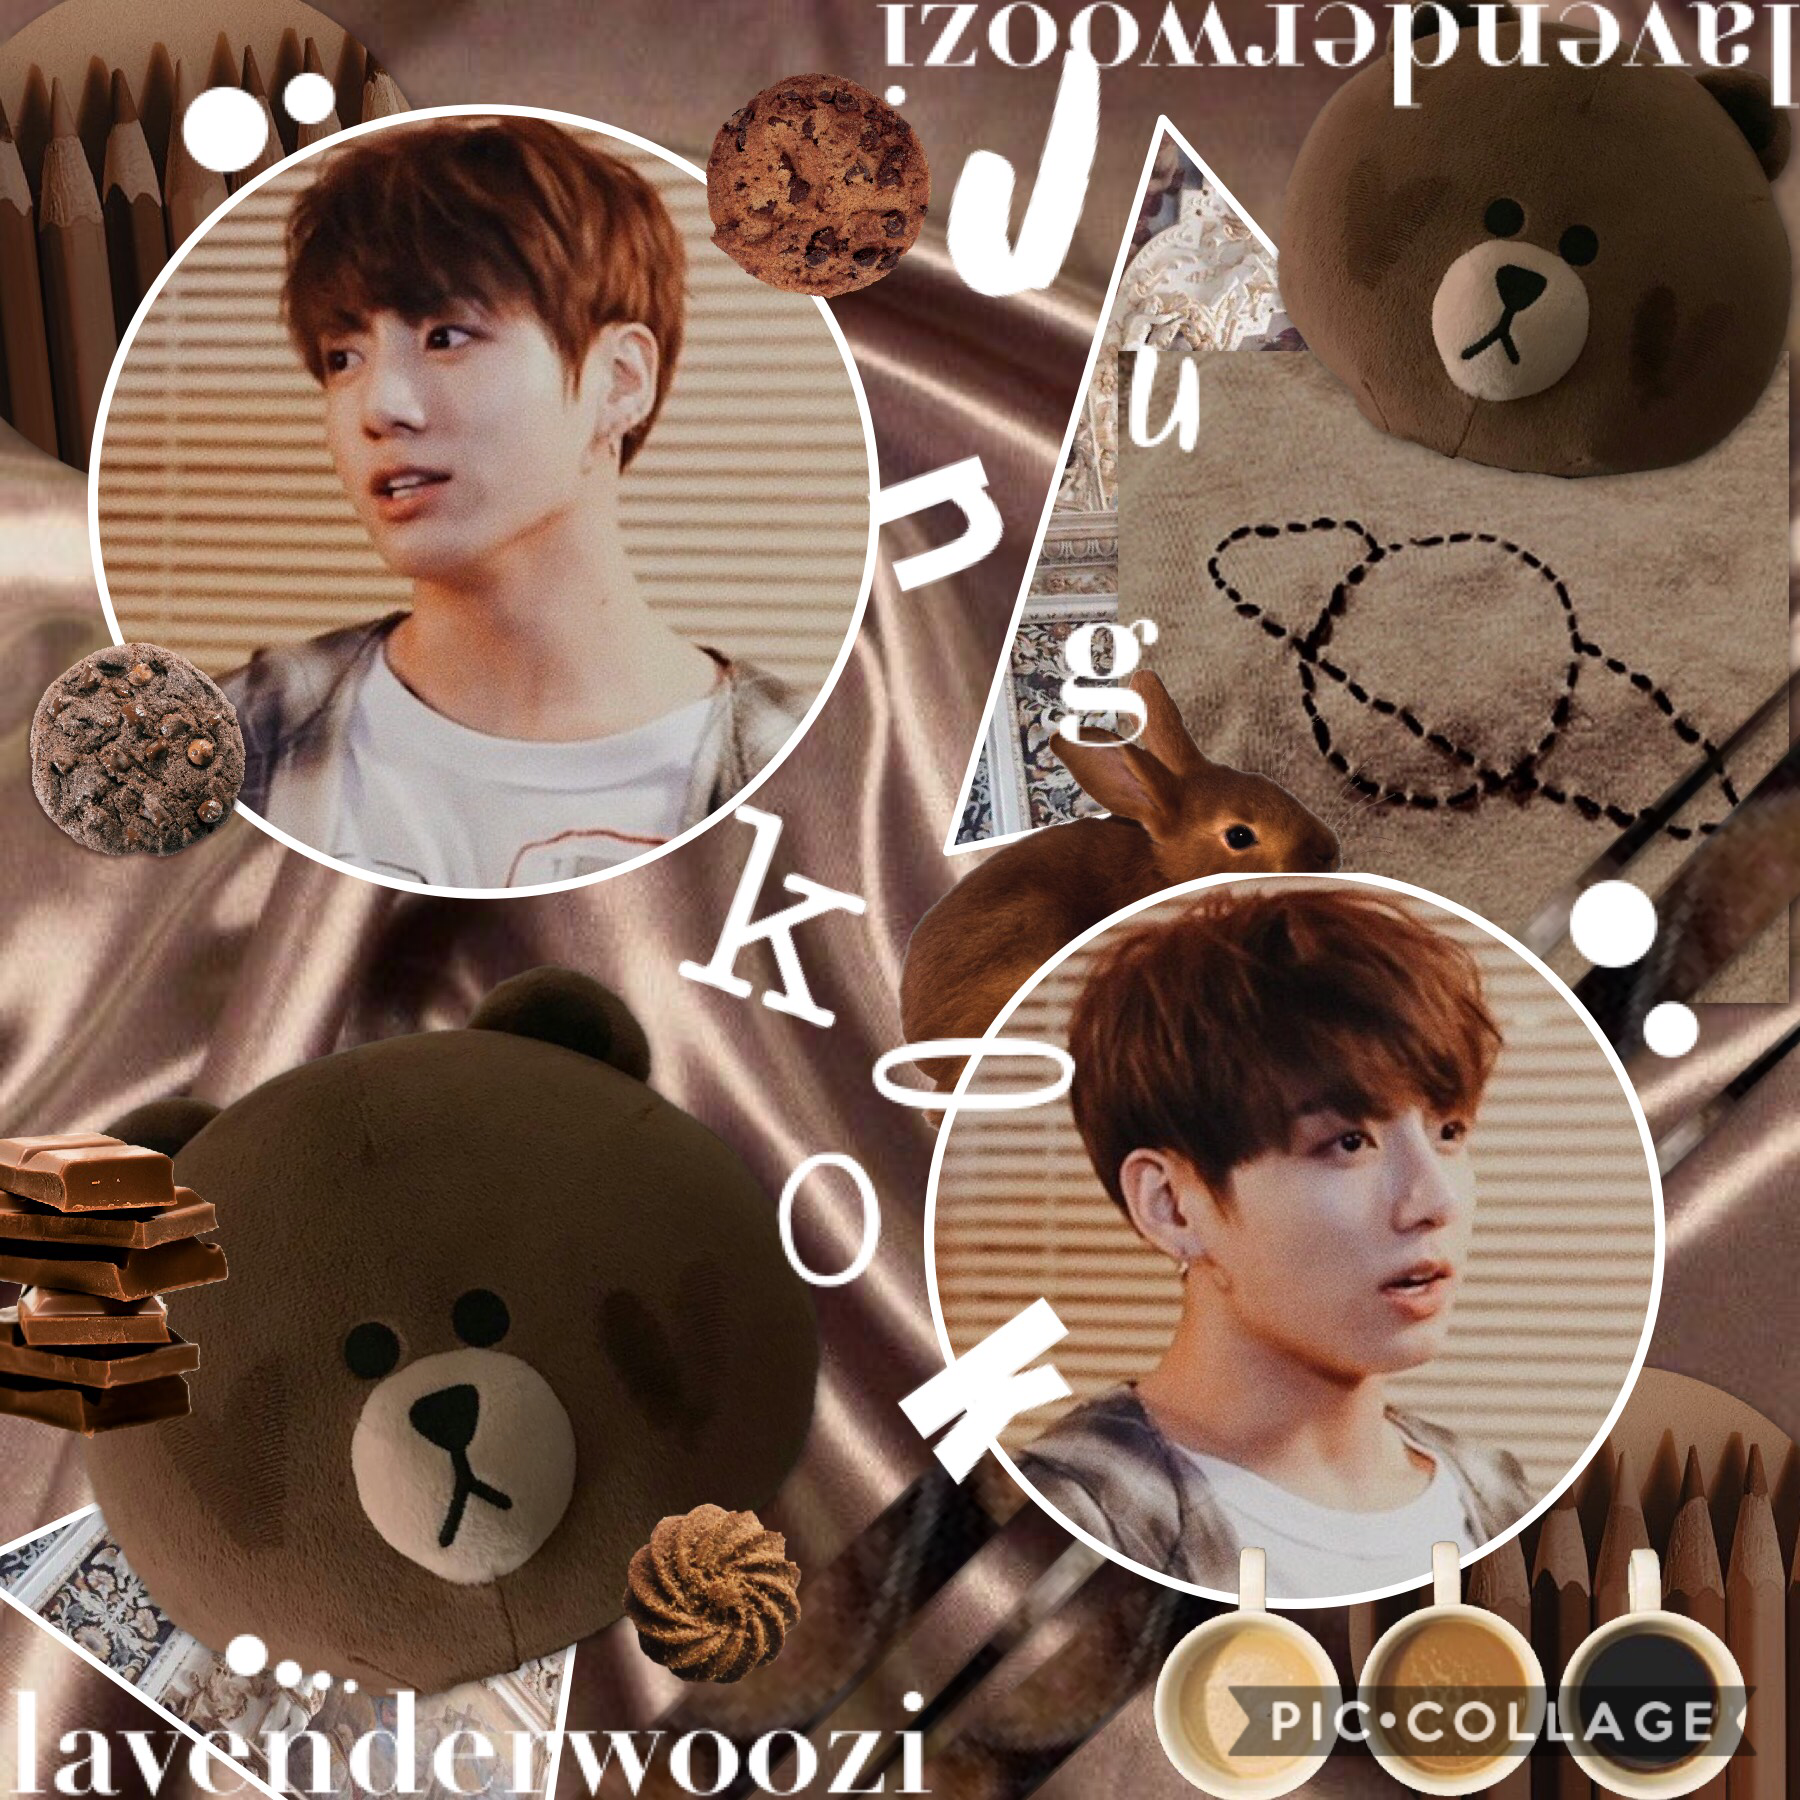 🍪 (another jungkook edit bc why not ❤️ i love him so frikin much 😩)